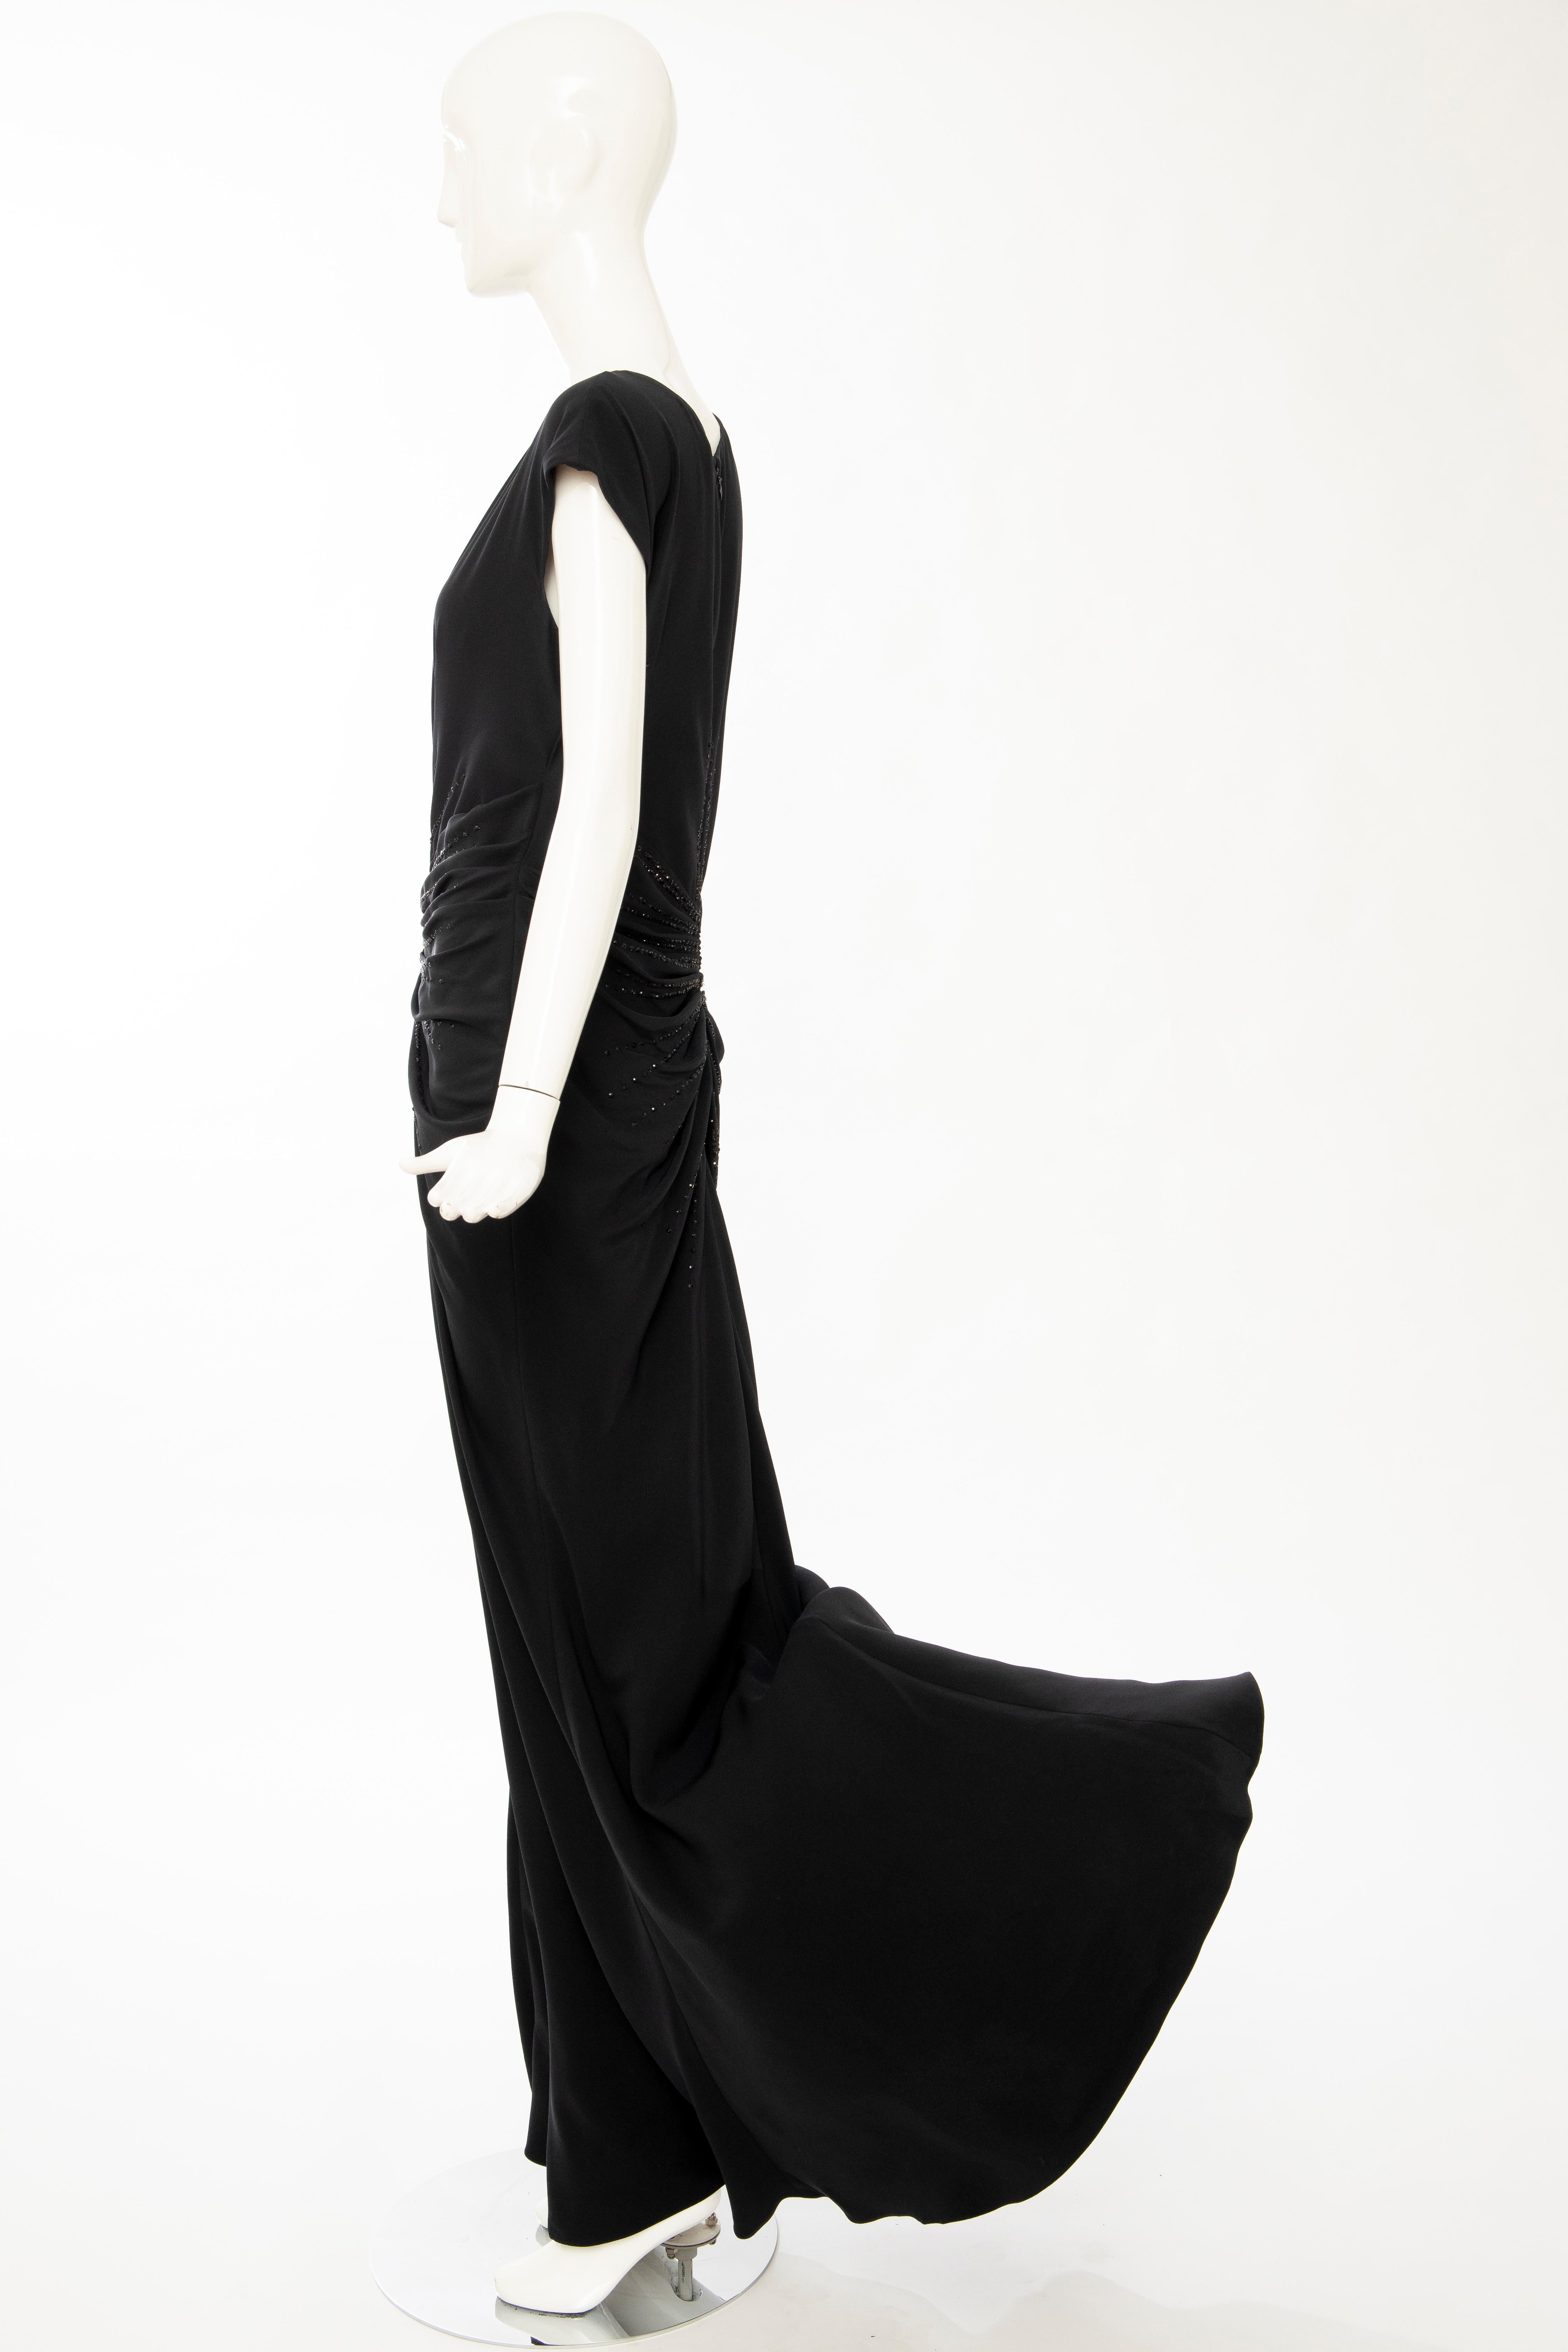 John Galliano for Christian Dior Black Embroidered Evening Dress, Spring 2008 8